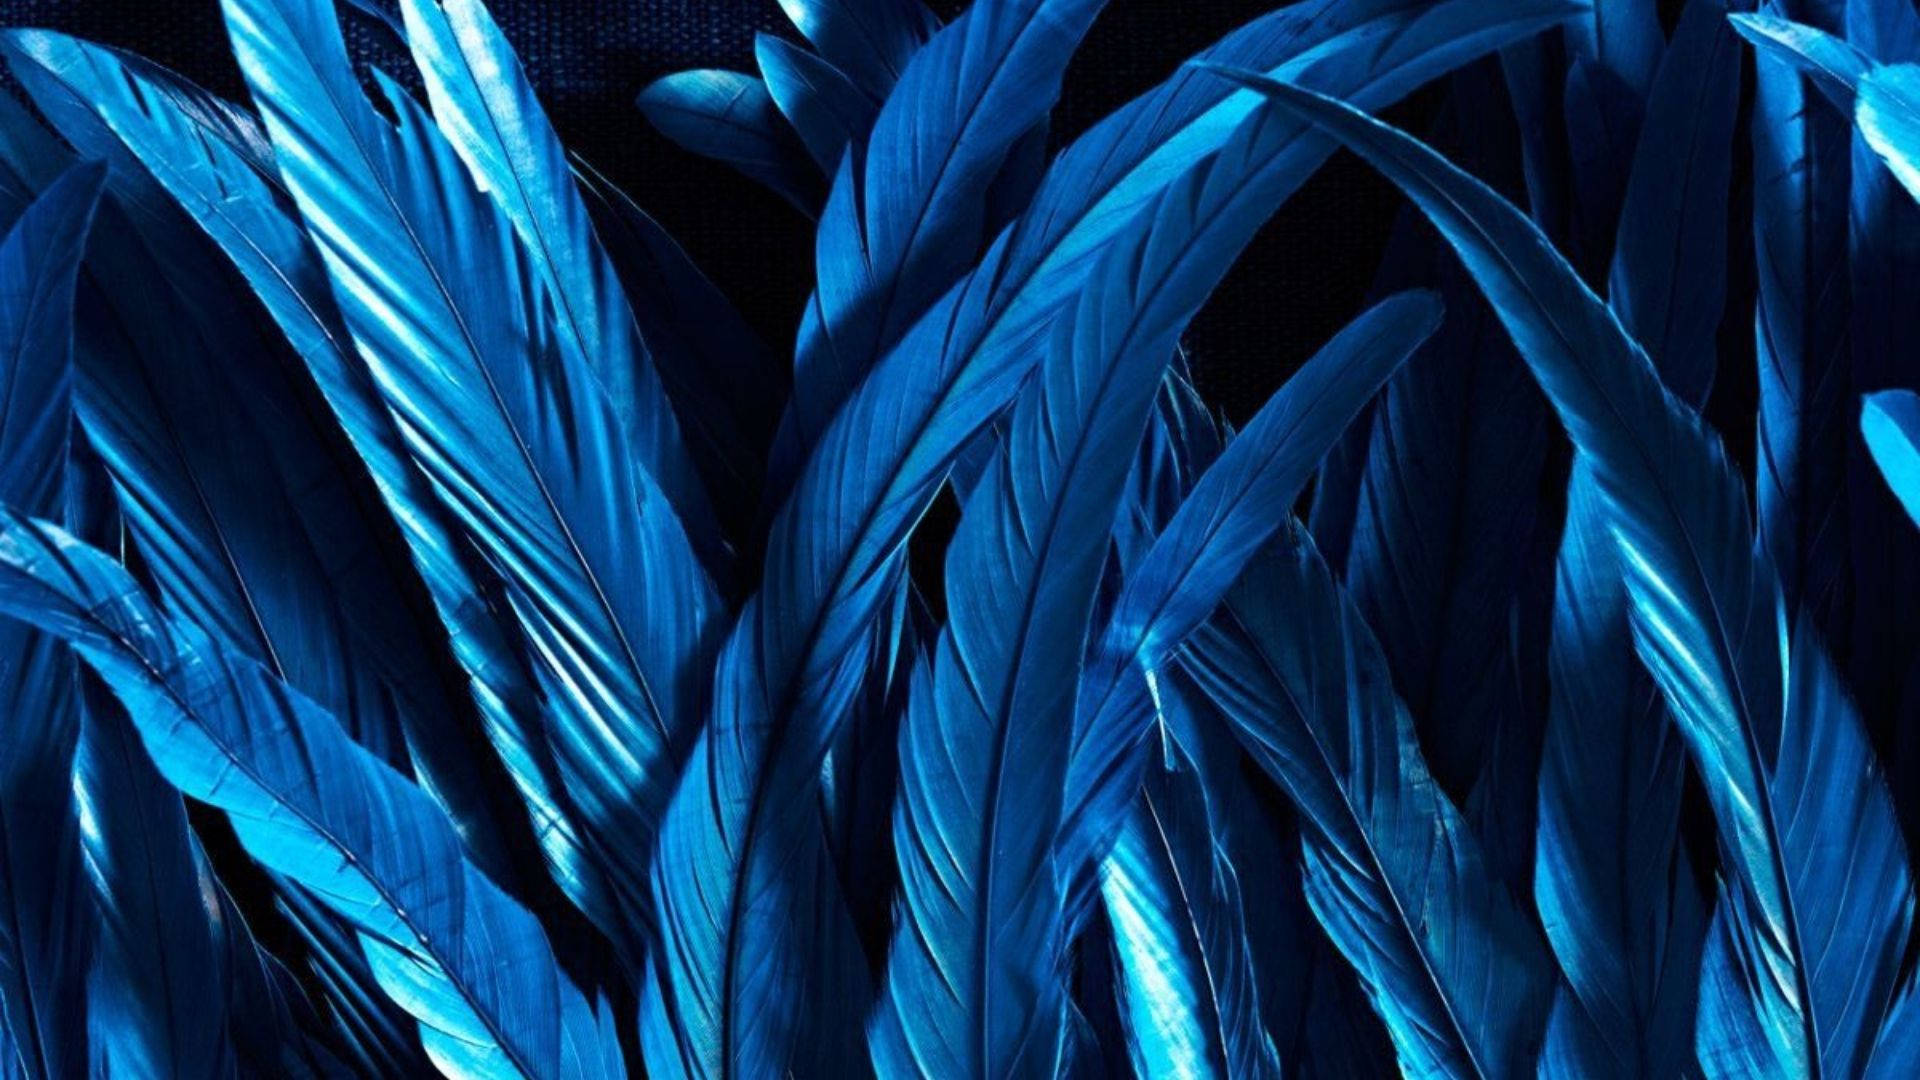 Neon Blue Feathers Wallpaper